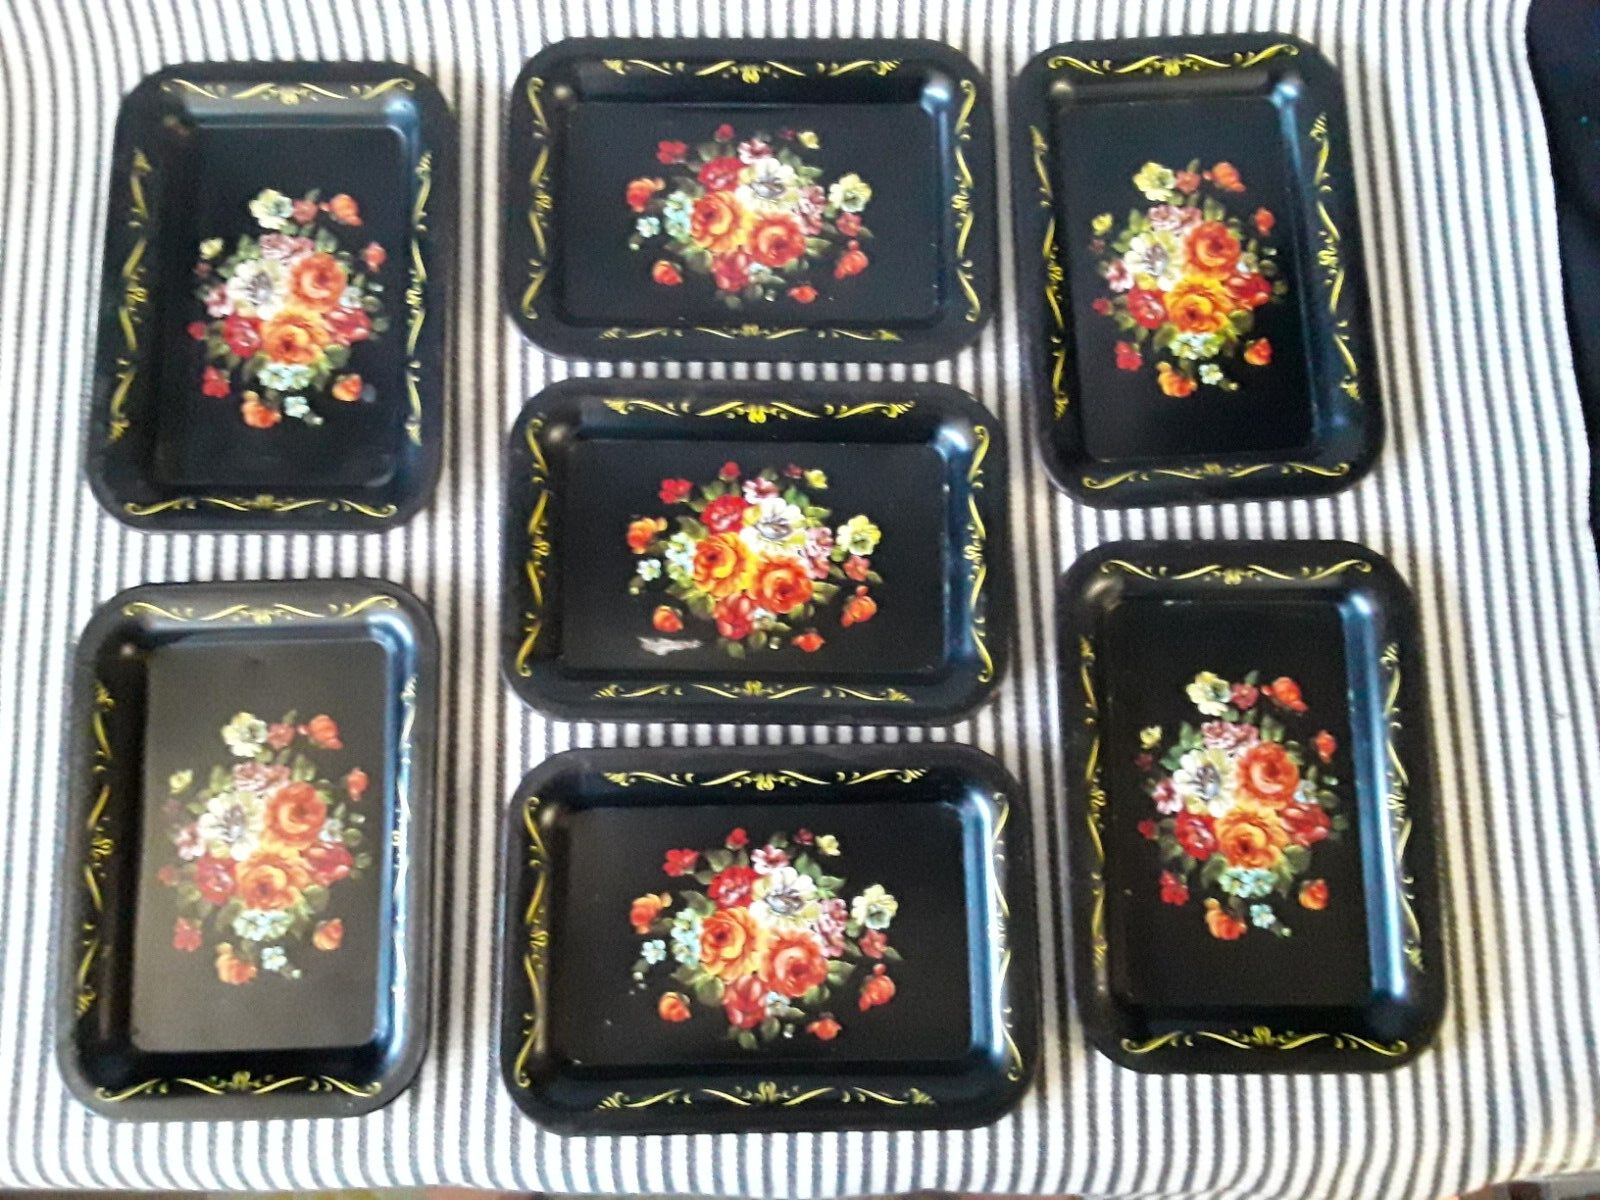 LOT OF 7 SET BLACK FLORAL TIN TOLE WARE METAL TRINKET VANITY TRAYS FLOWERS SMALL Unbranded